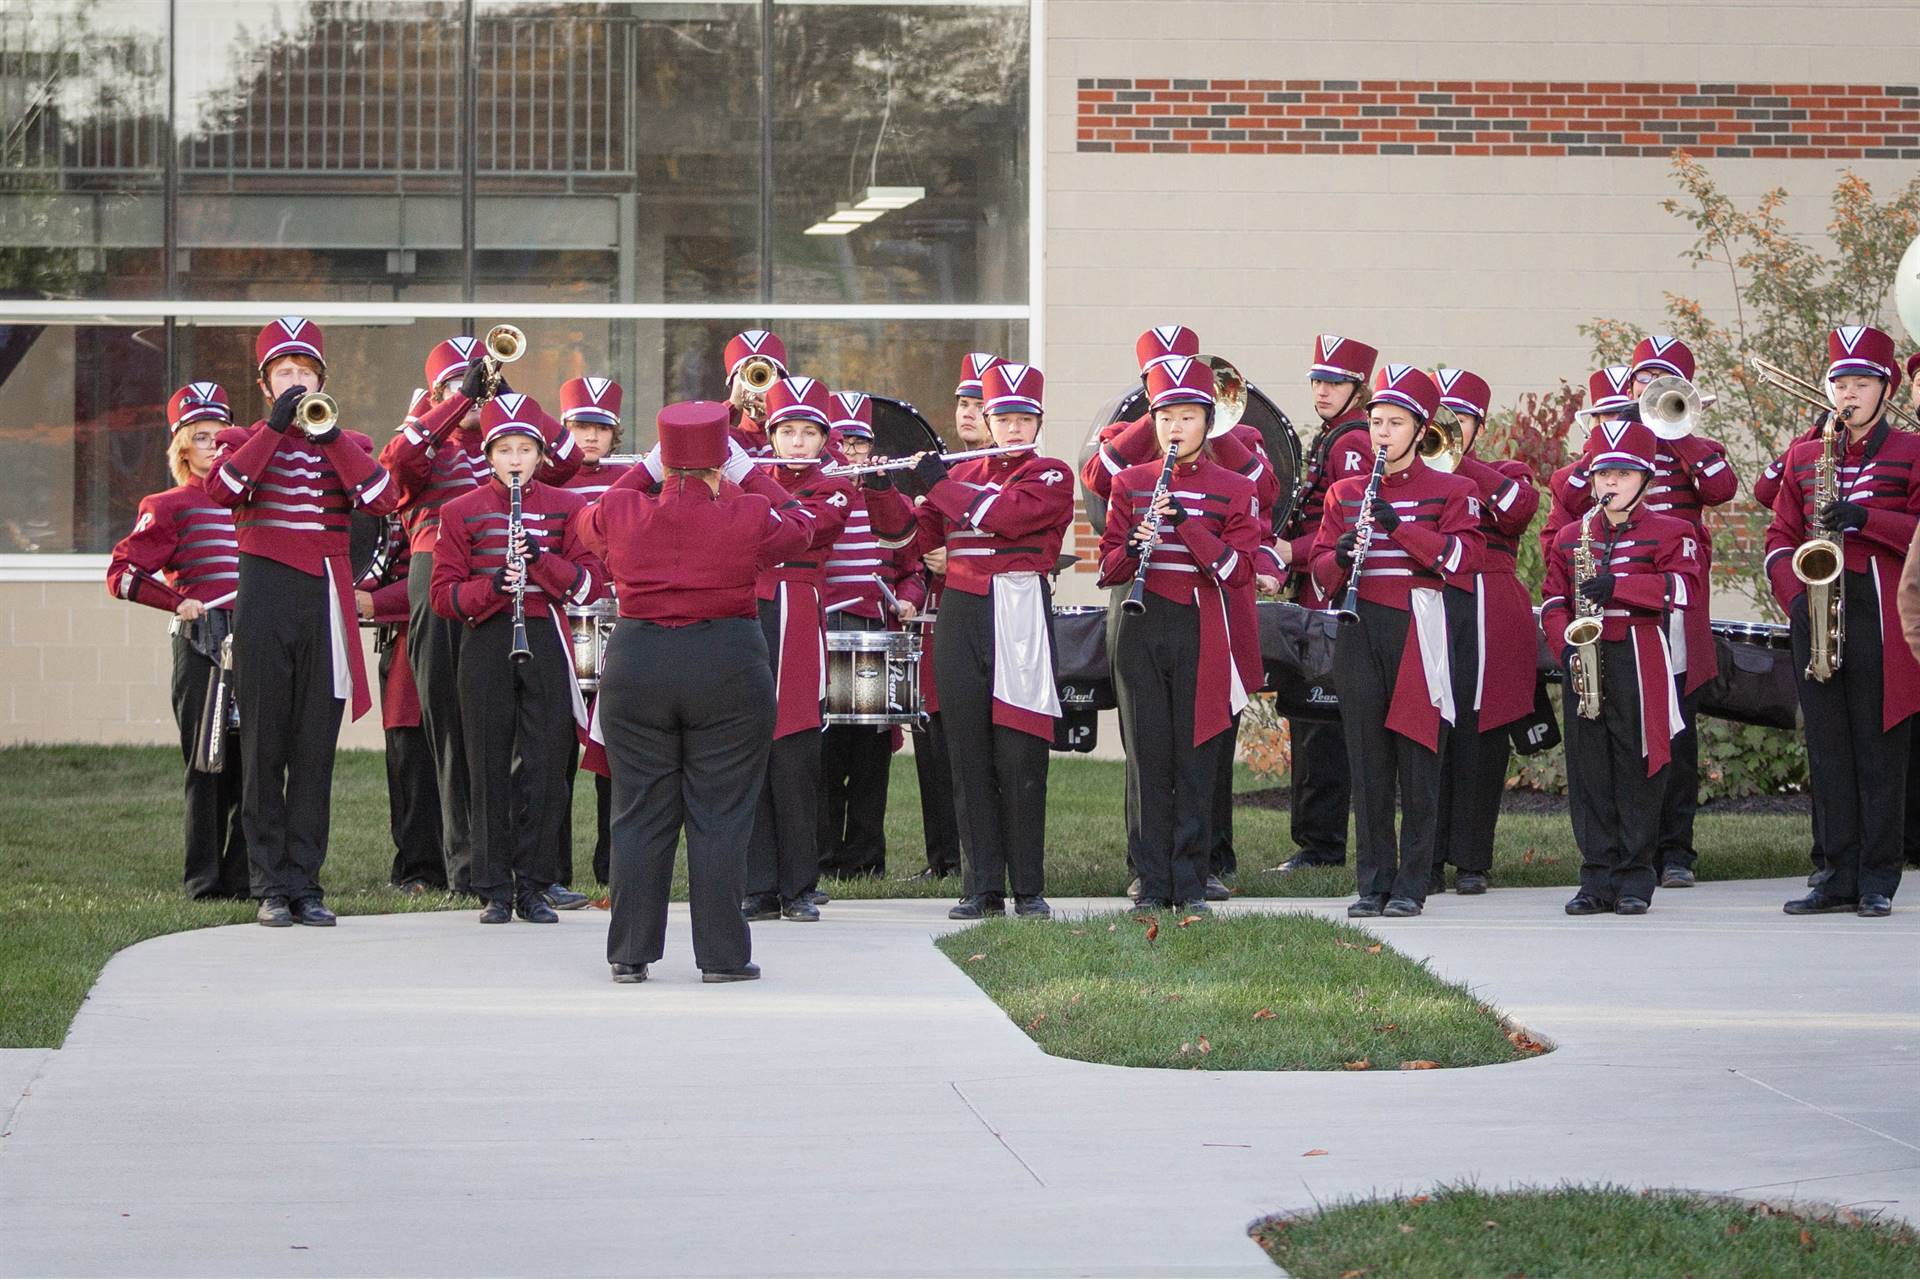 Rossford Alumni Tailgate - RHS Marching Band Performing.